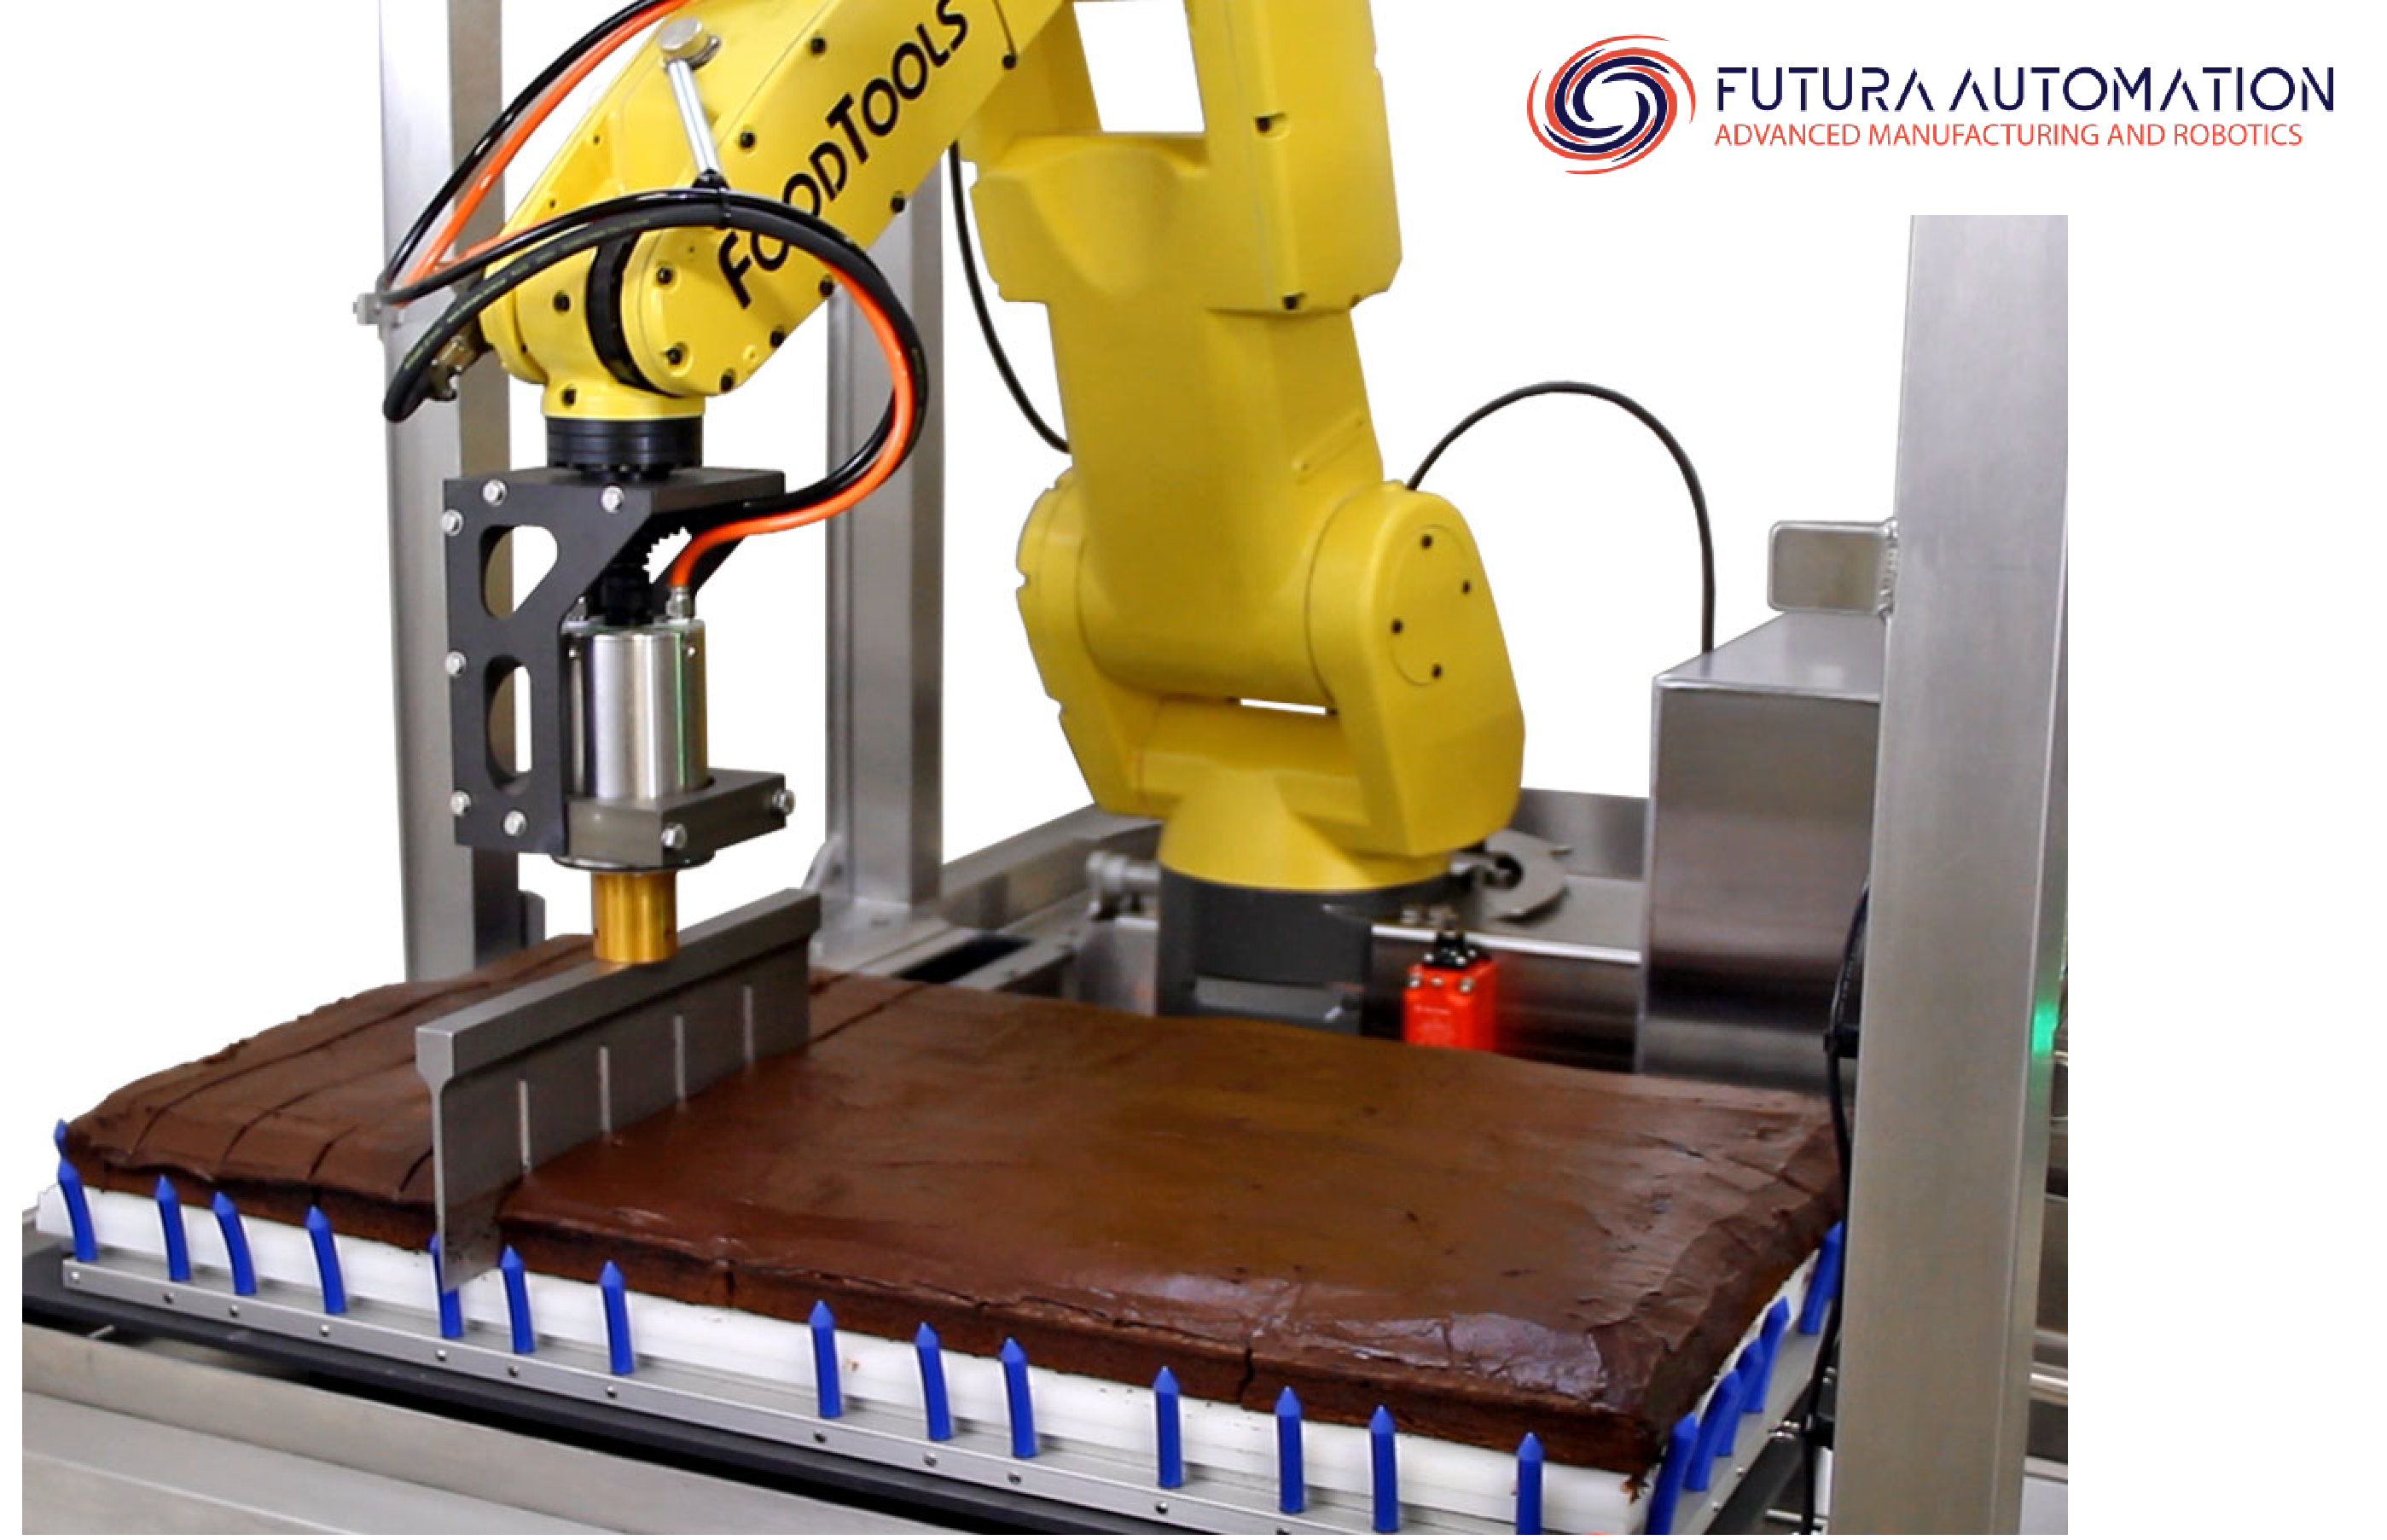 Futura Automation presents Food Processing Solutions